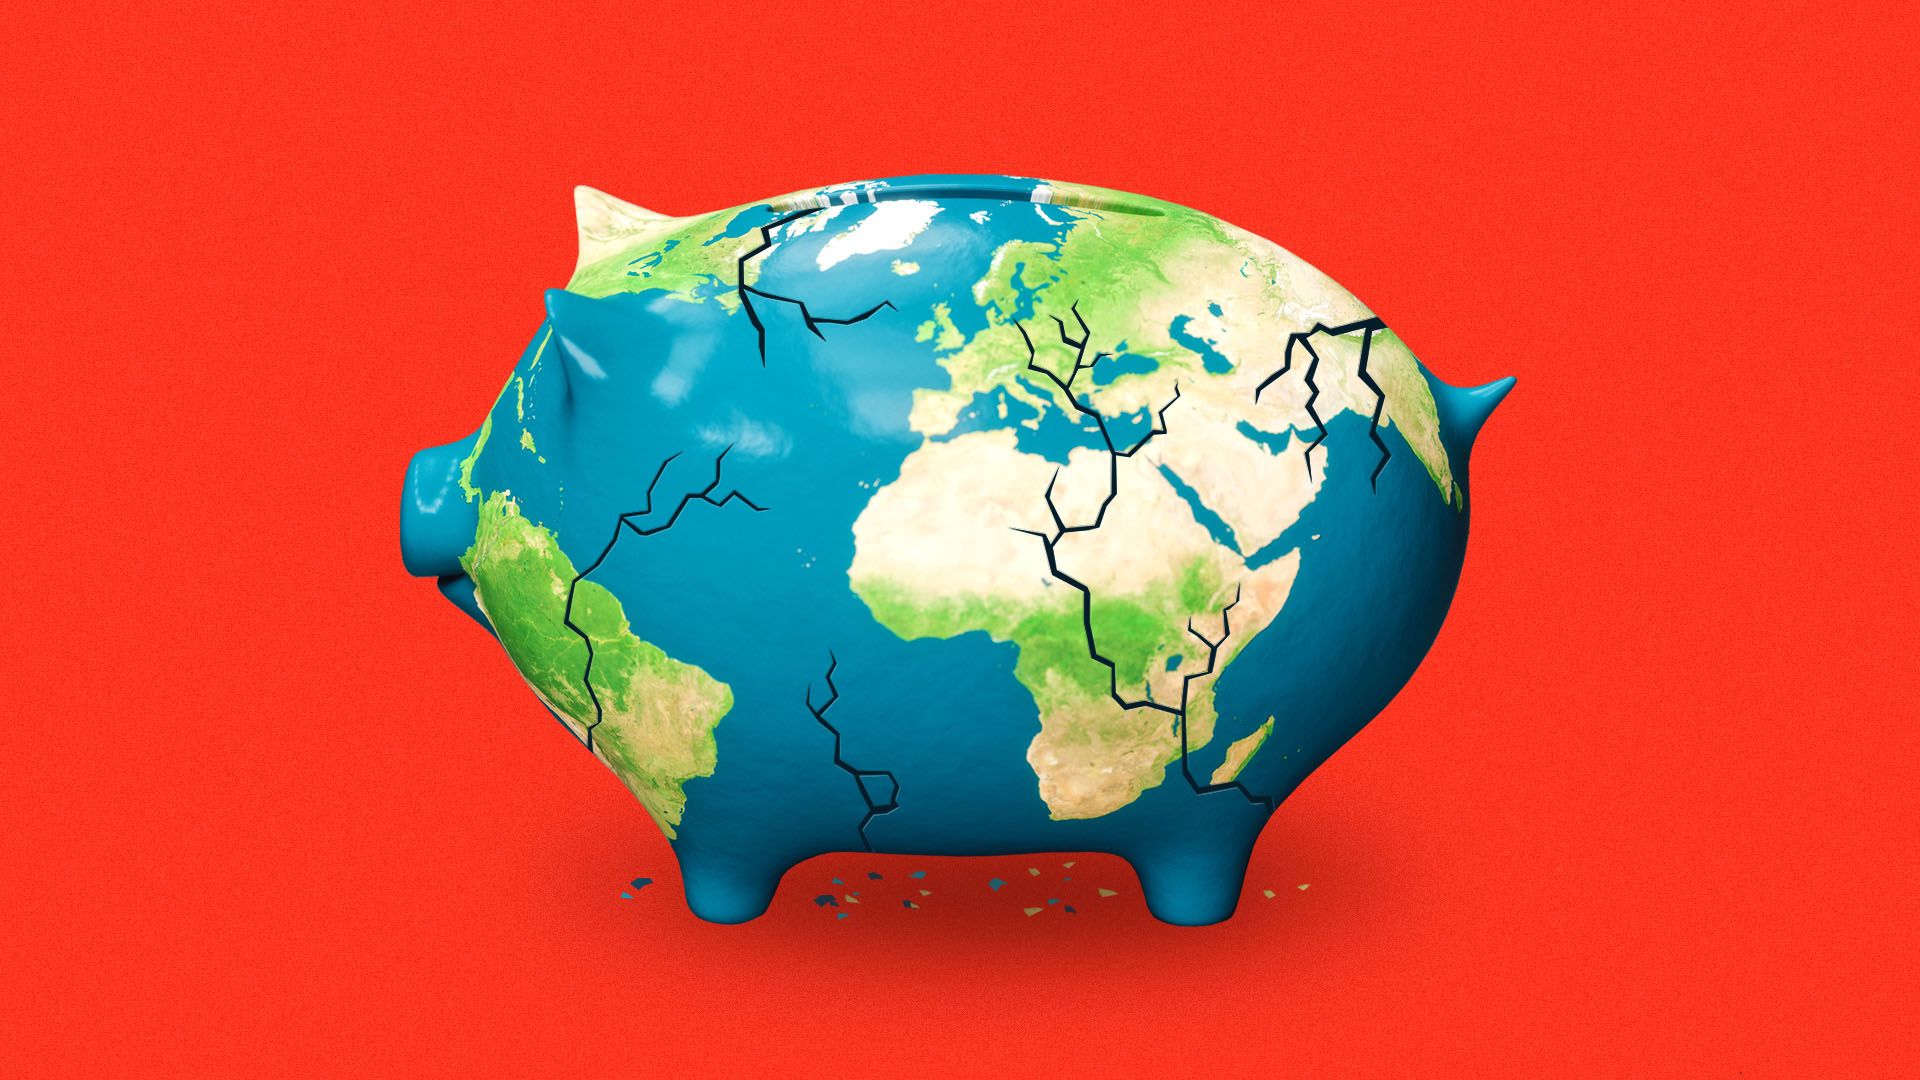 Illustration of a cracked piggy bank shaped like the earth